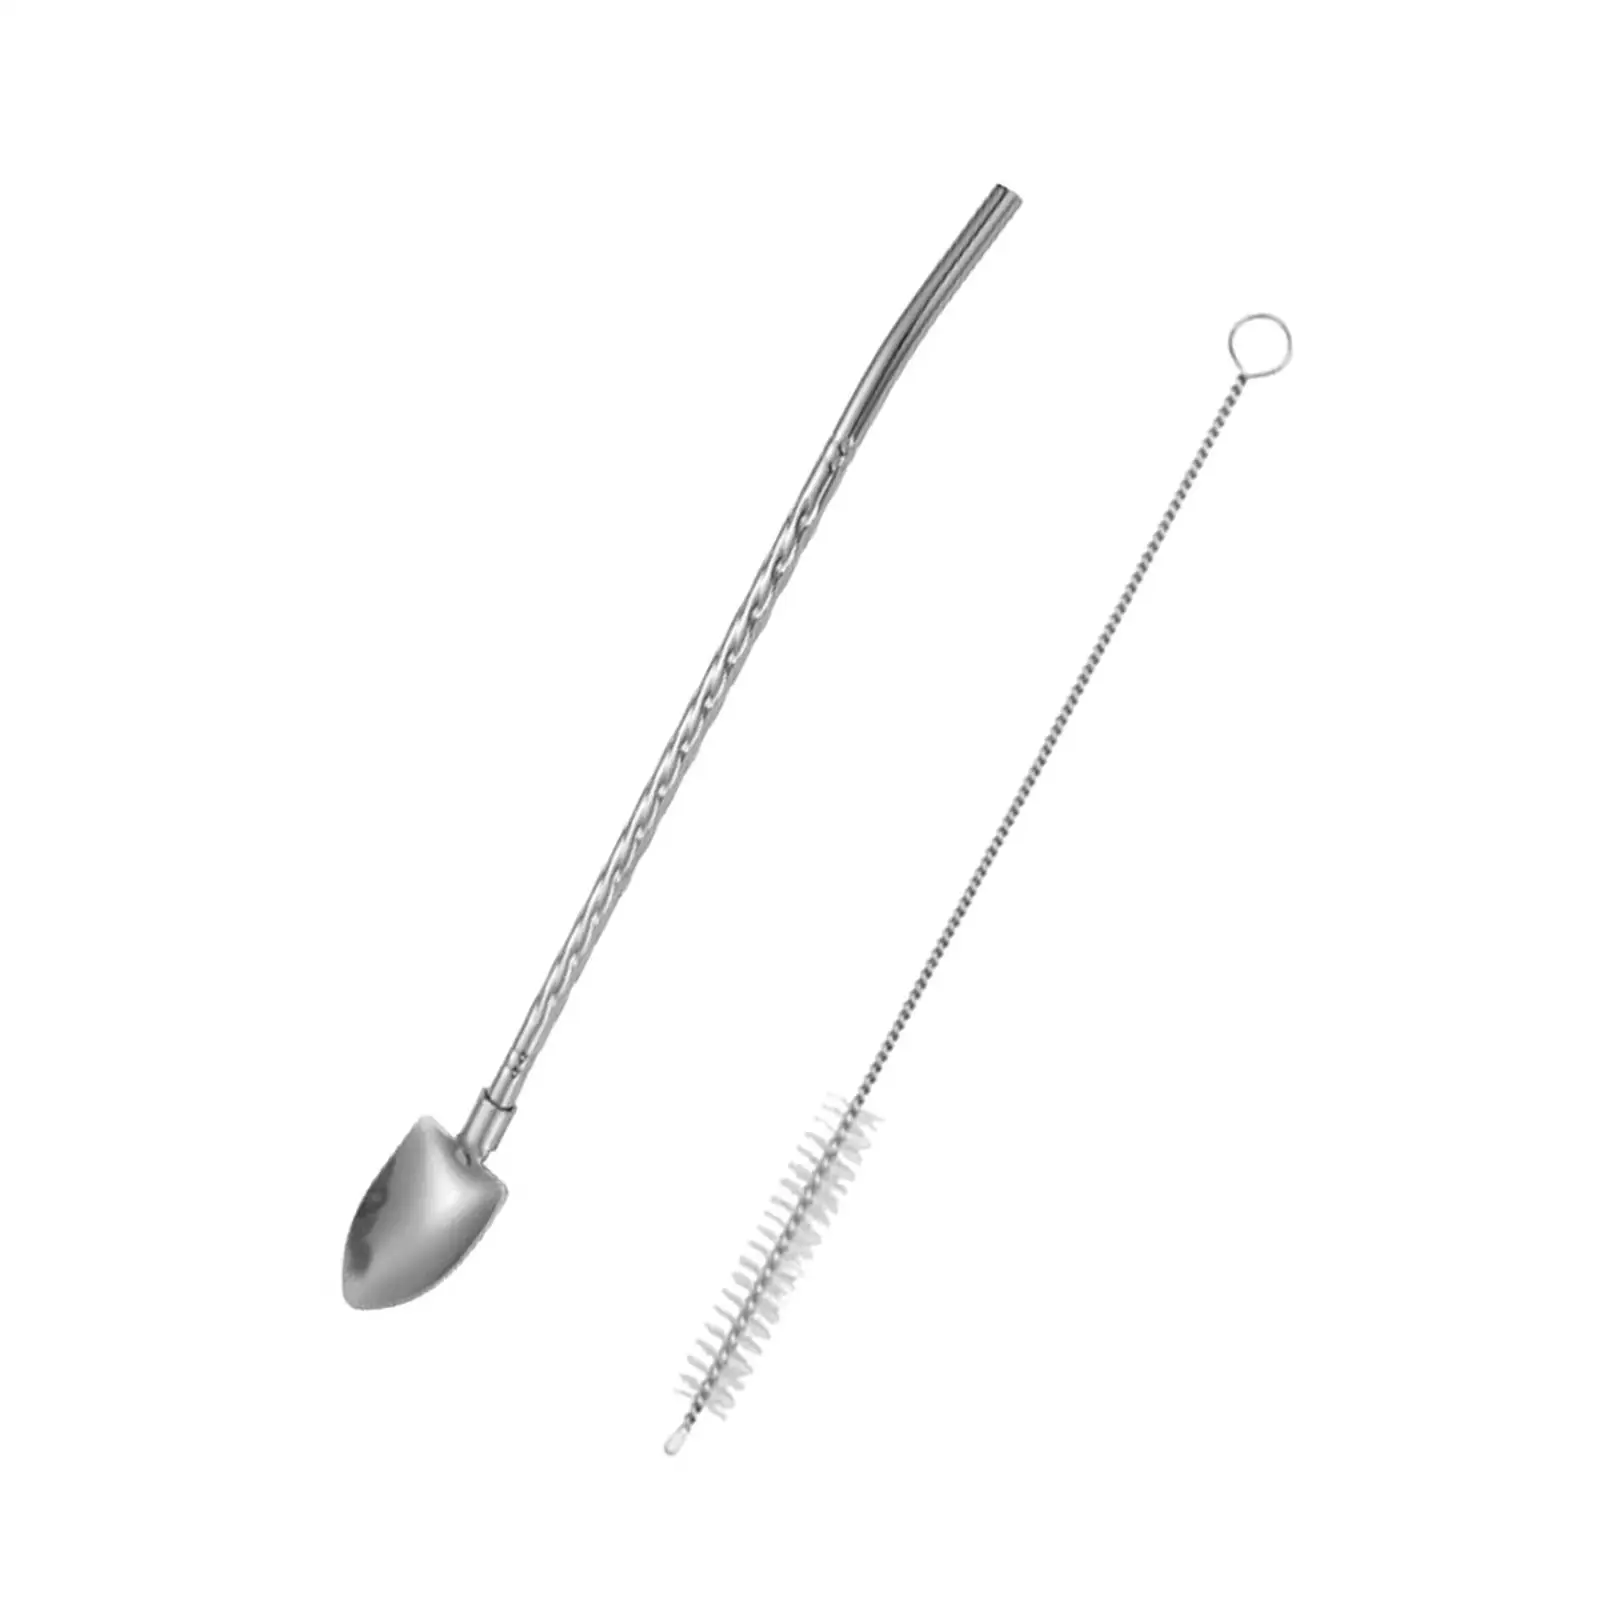 Reusable Spoon Mixing Stirring Spoon with Cleaning Brush Drinking Straw Drinking Stirring Spoons Straw for Tea Juice Ice Cream